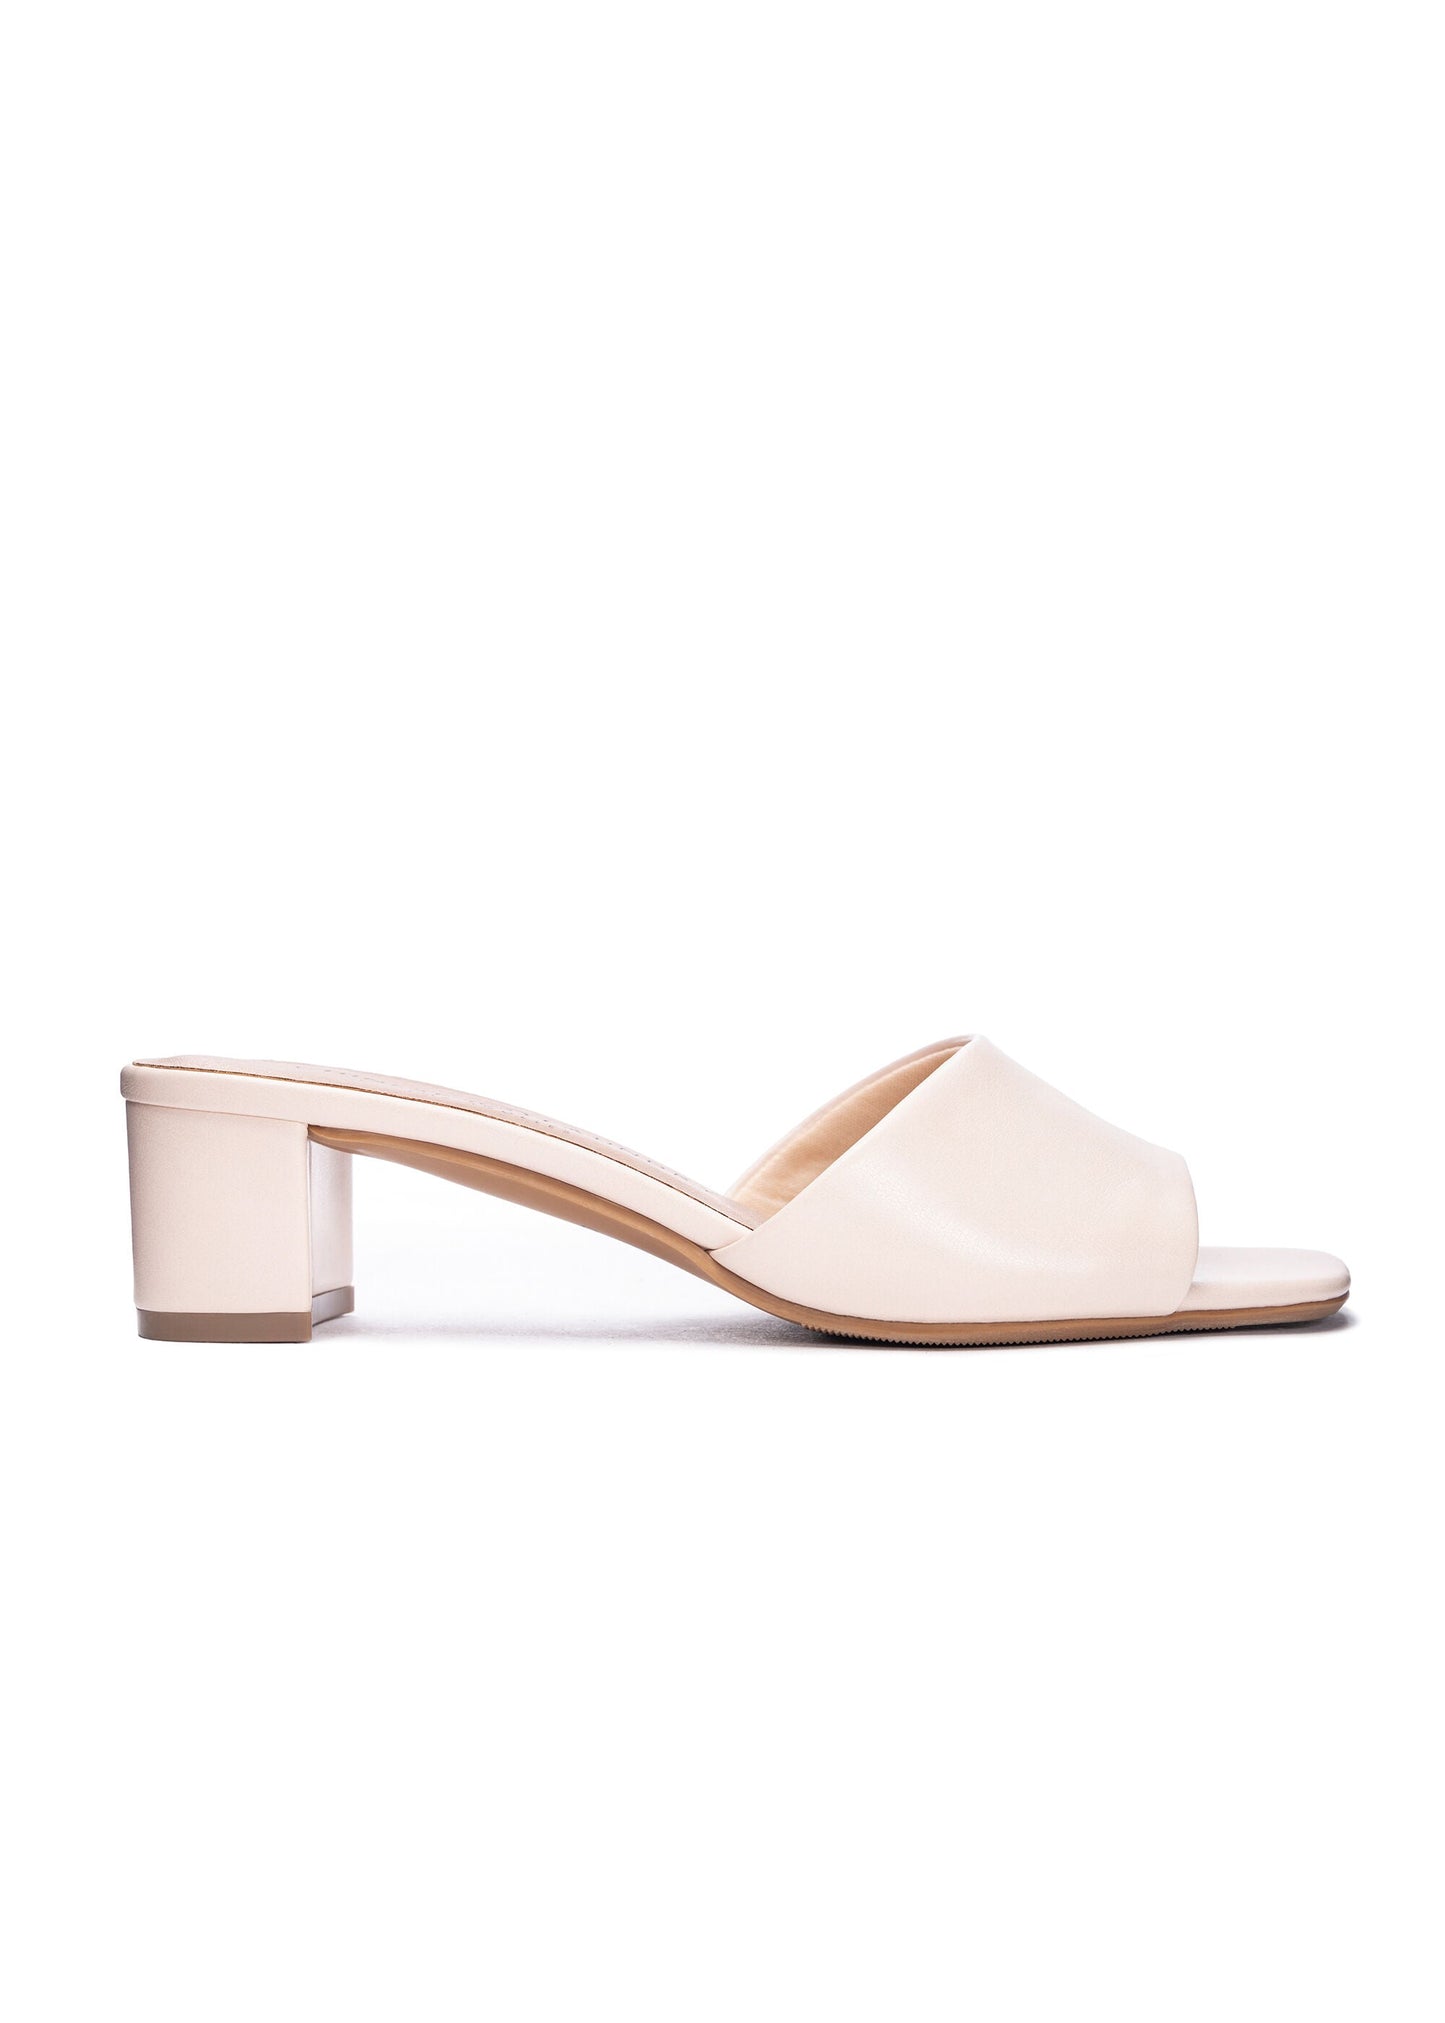 CL by Chinese Laundry Lana Slip On Smooth Mules-FINAL SALE Accessories